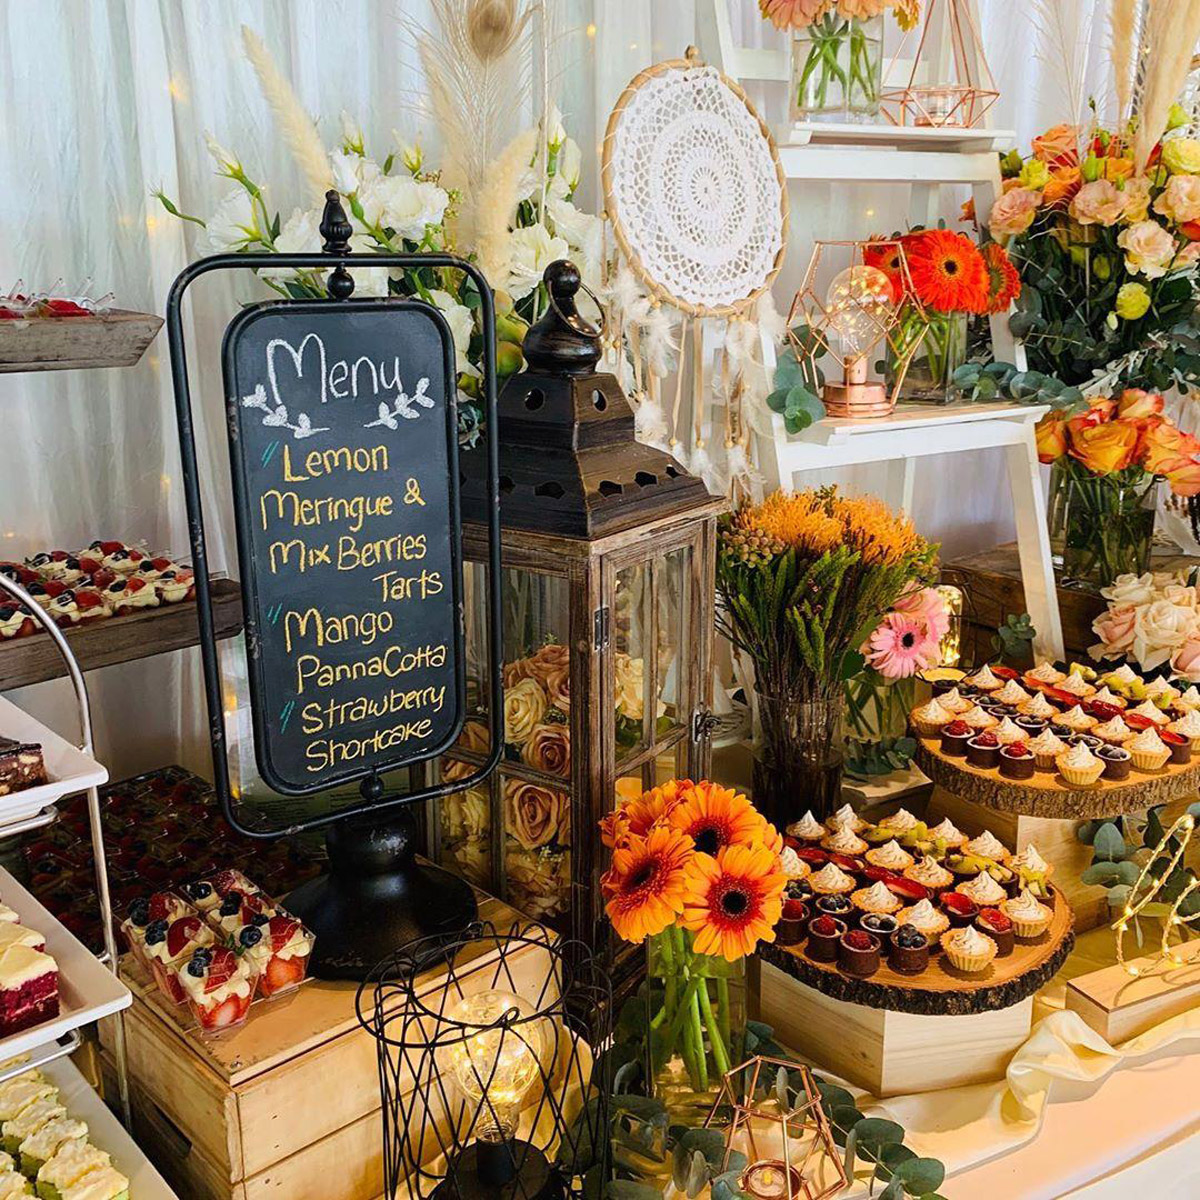 Kigi Catering: Wedding Catering Done Right with Gourmet Delicacies & Personalised Decor Set-Ups